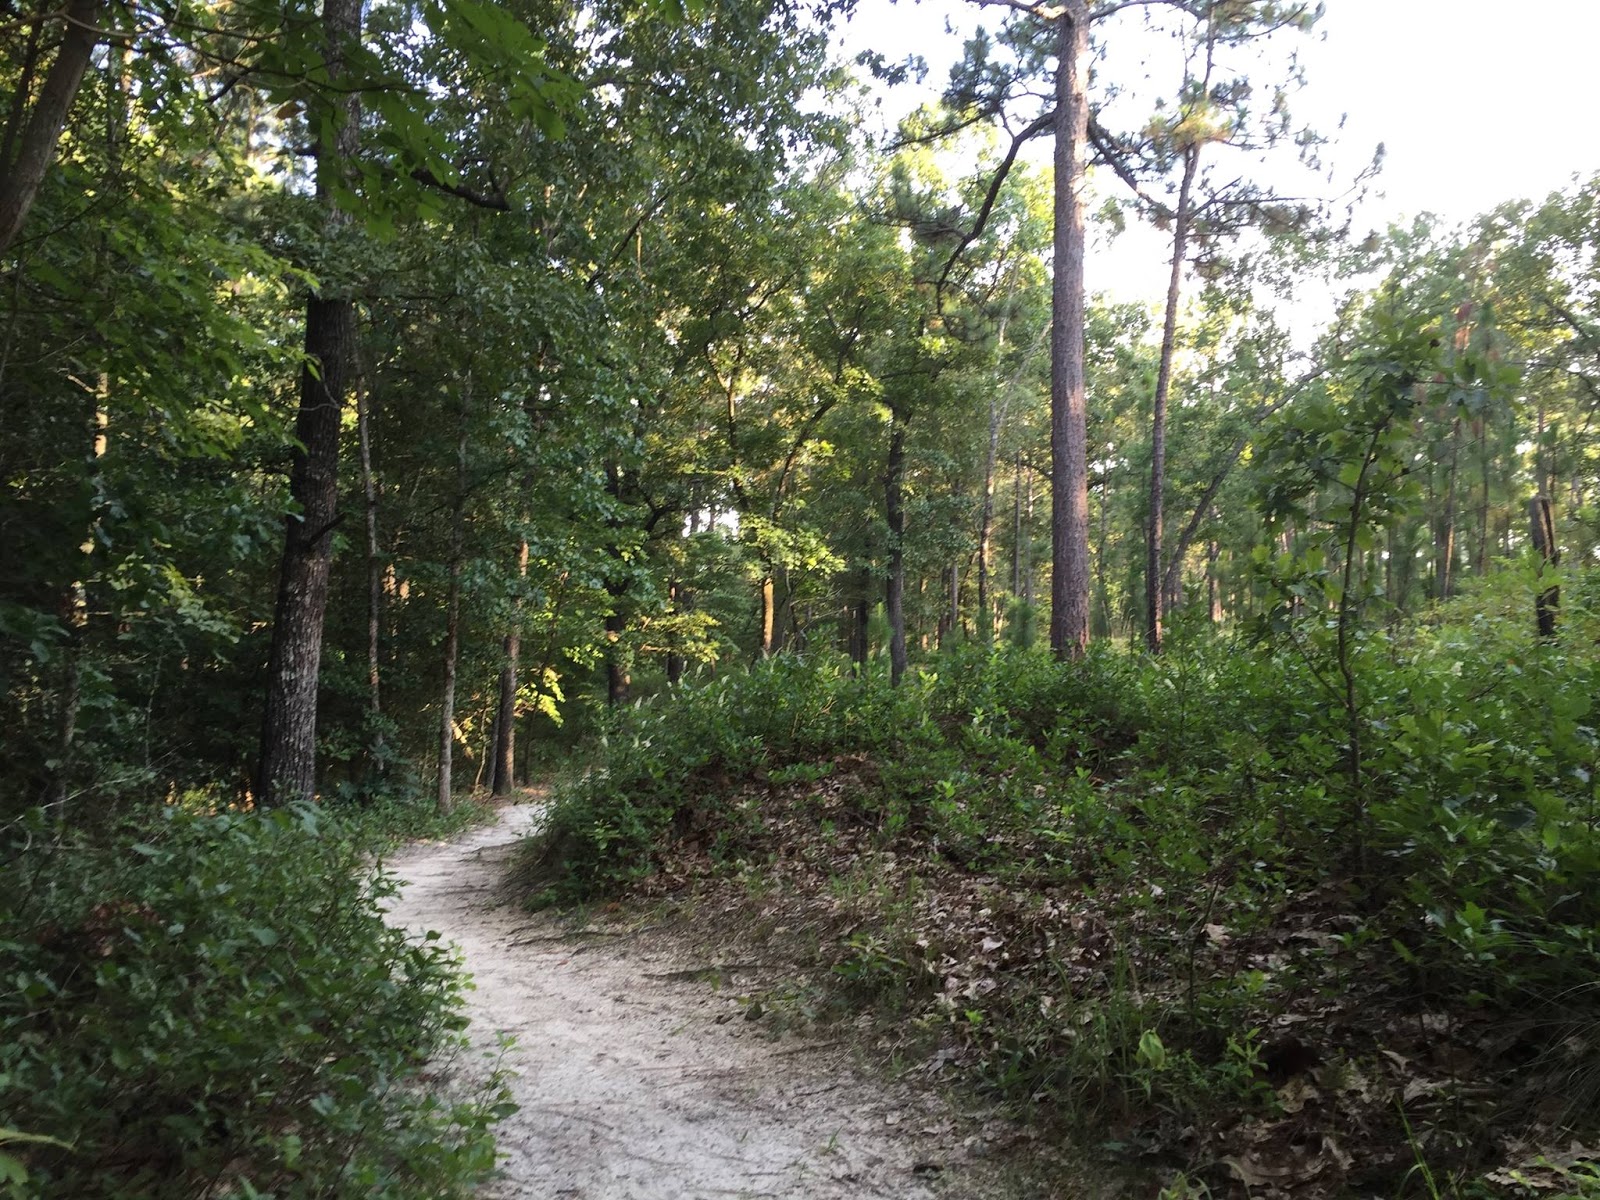 Musings: An evening hike in the Sandhills of North Carolina